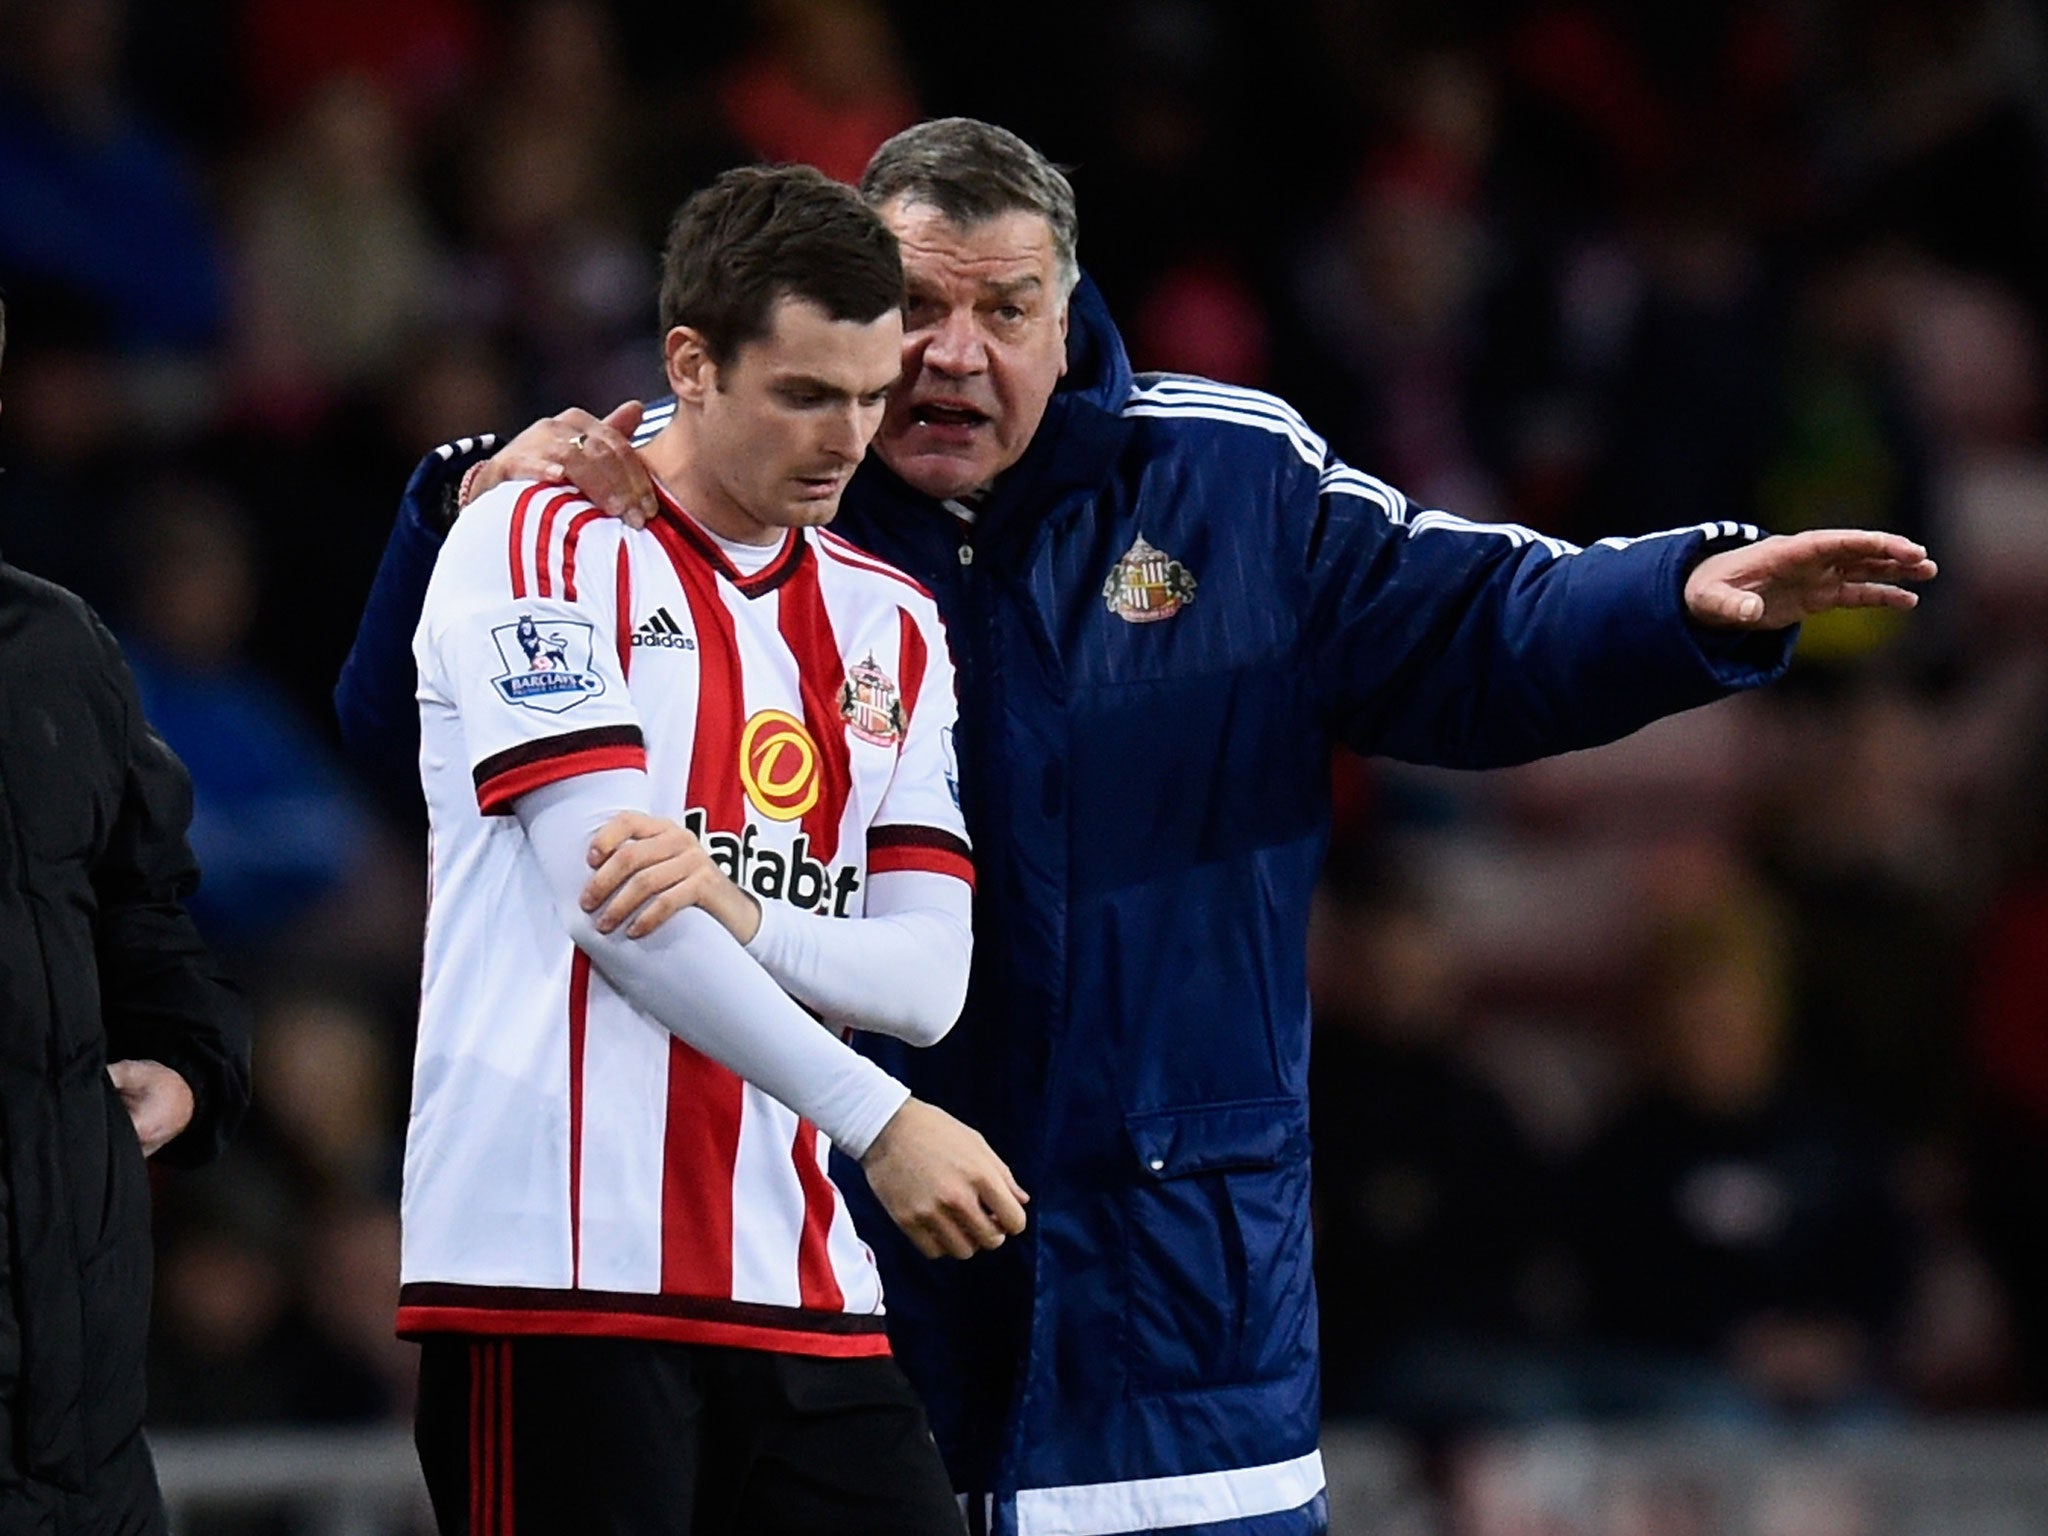 Sam Allardyce, right said the Adam Johnson case had caused the most difficult period of his career